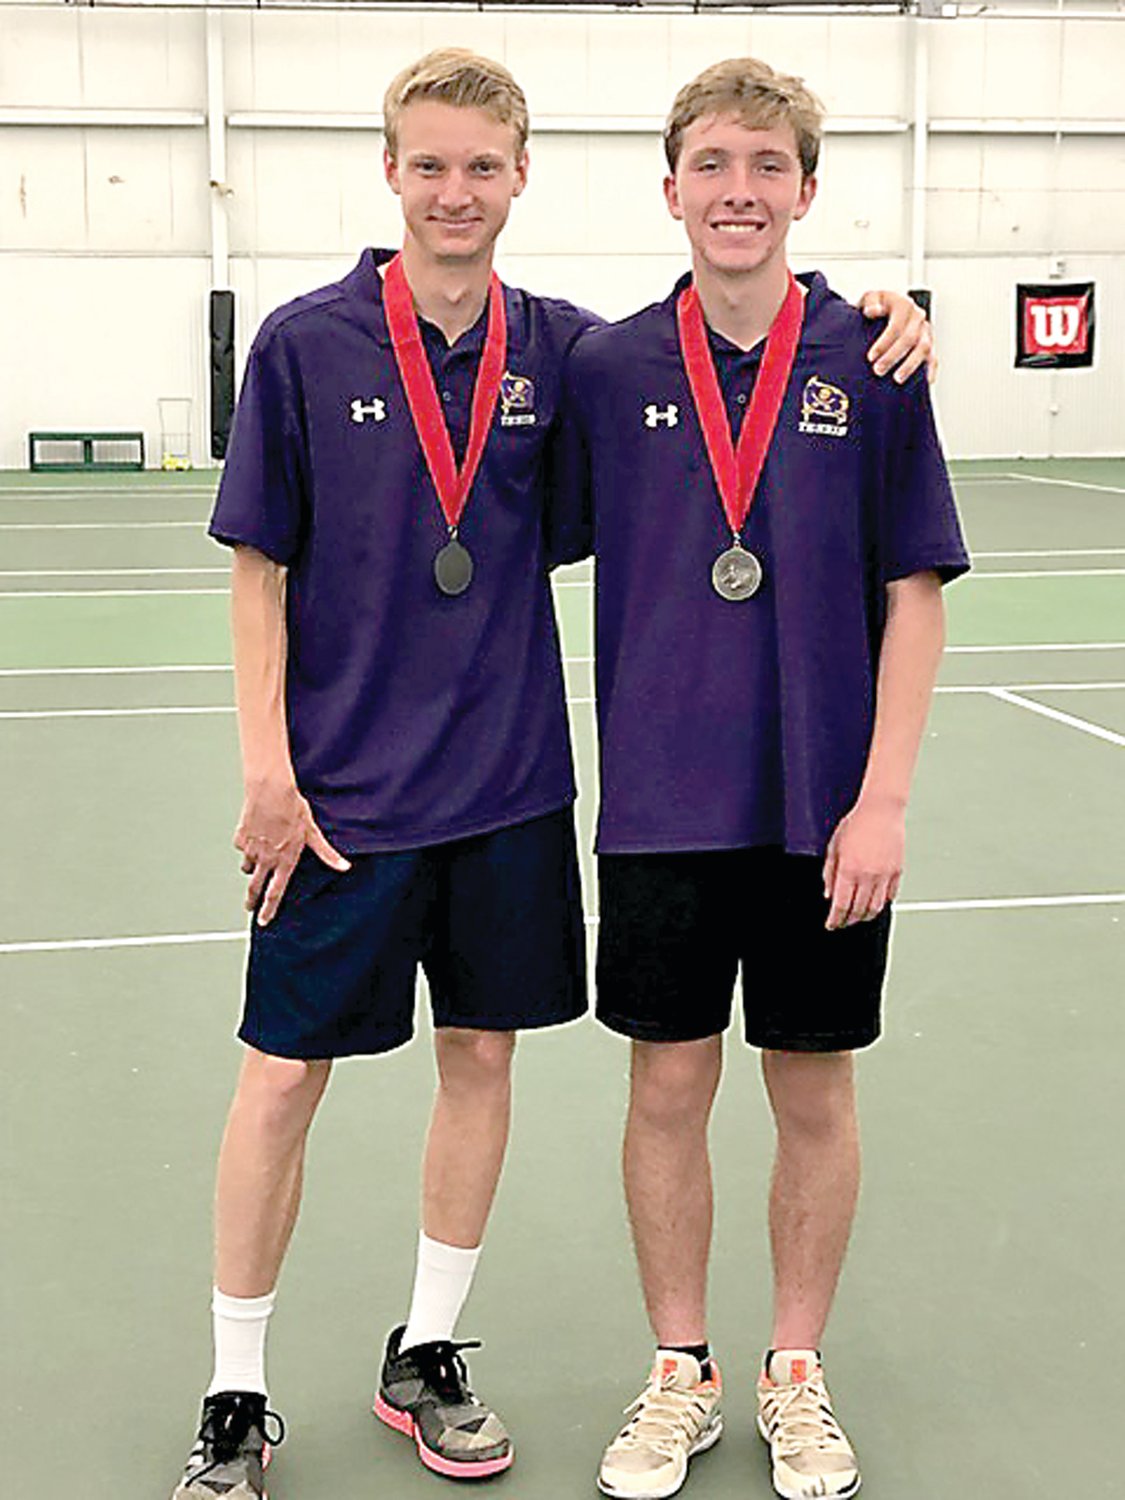 Palisades’ Gavin Kelly and Michael Swope reached the District 11 Class 2A doubles finals and helped their team to one of its best seasons in school history.